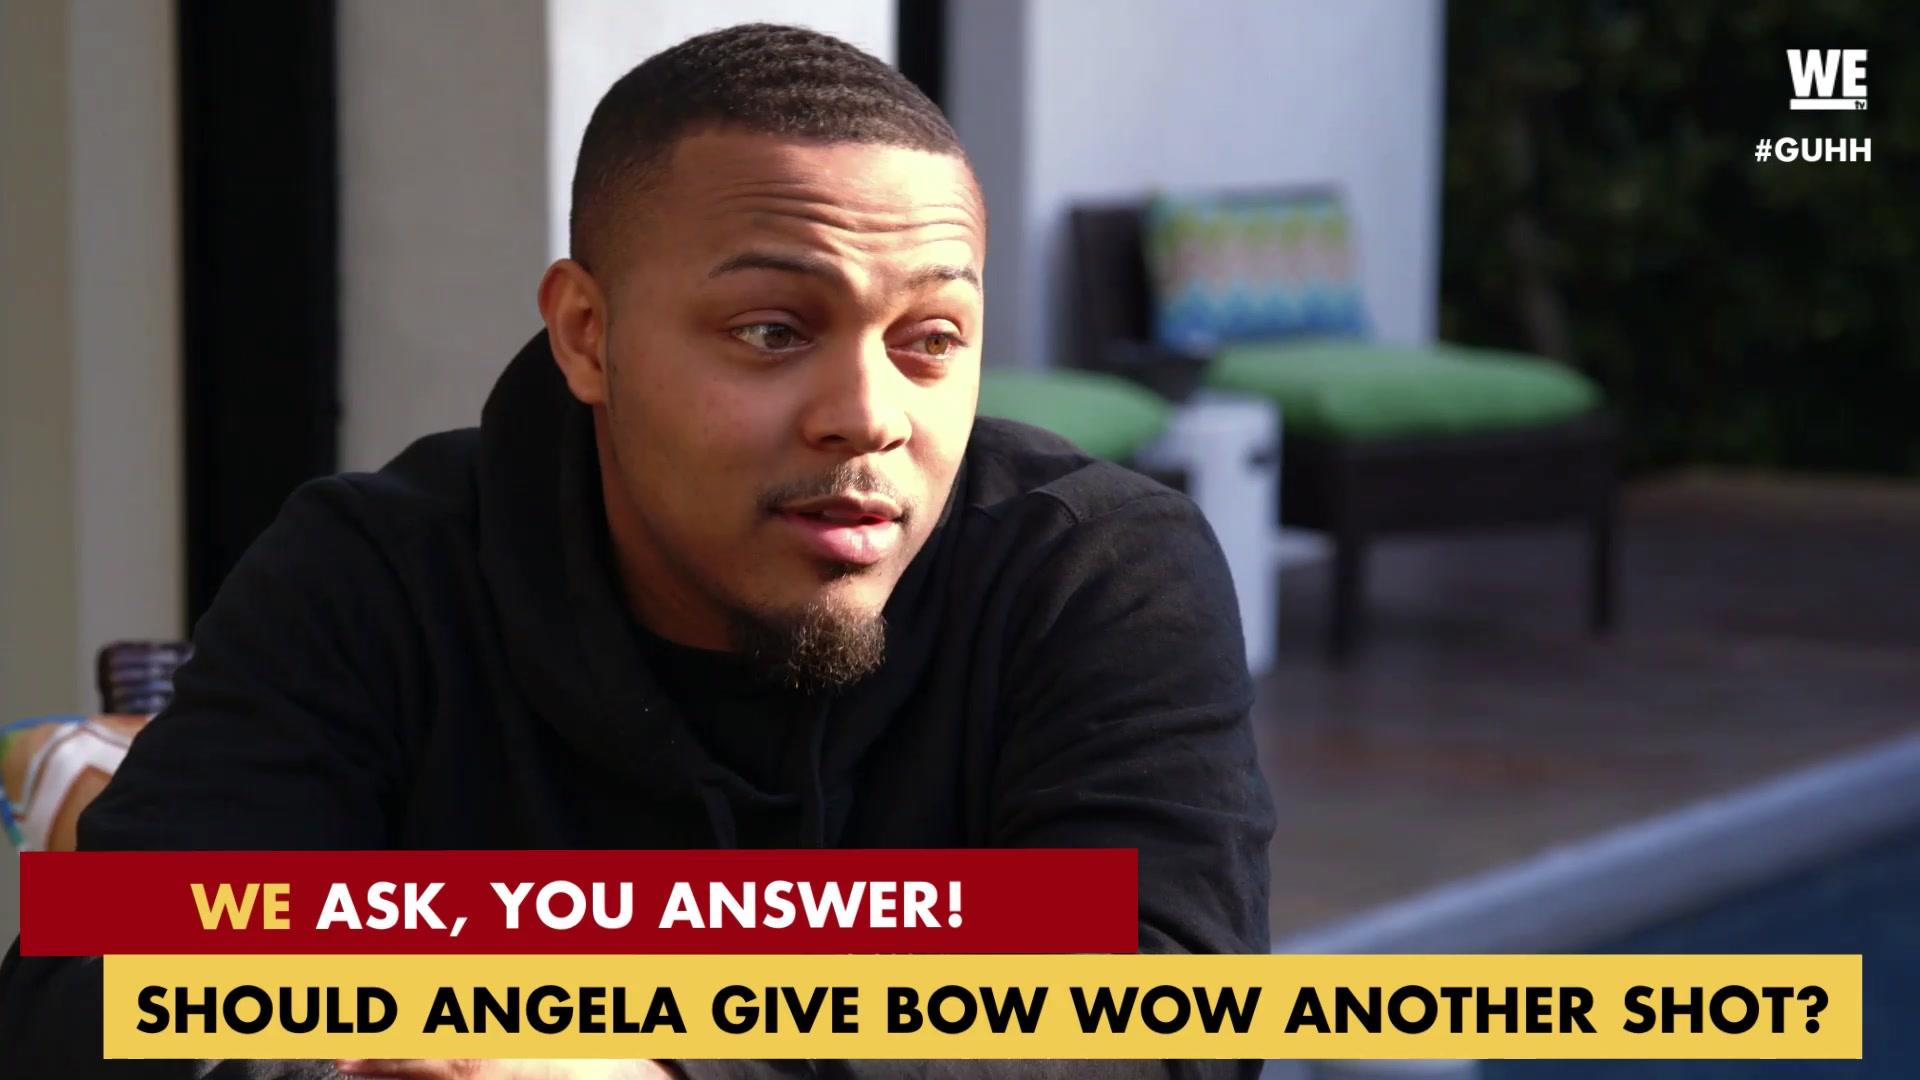 WE Ask, You Answer: Should Angela Give Bow Wow Another Shot?